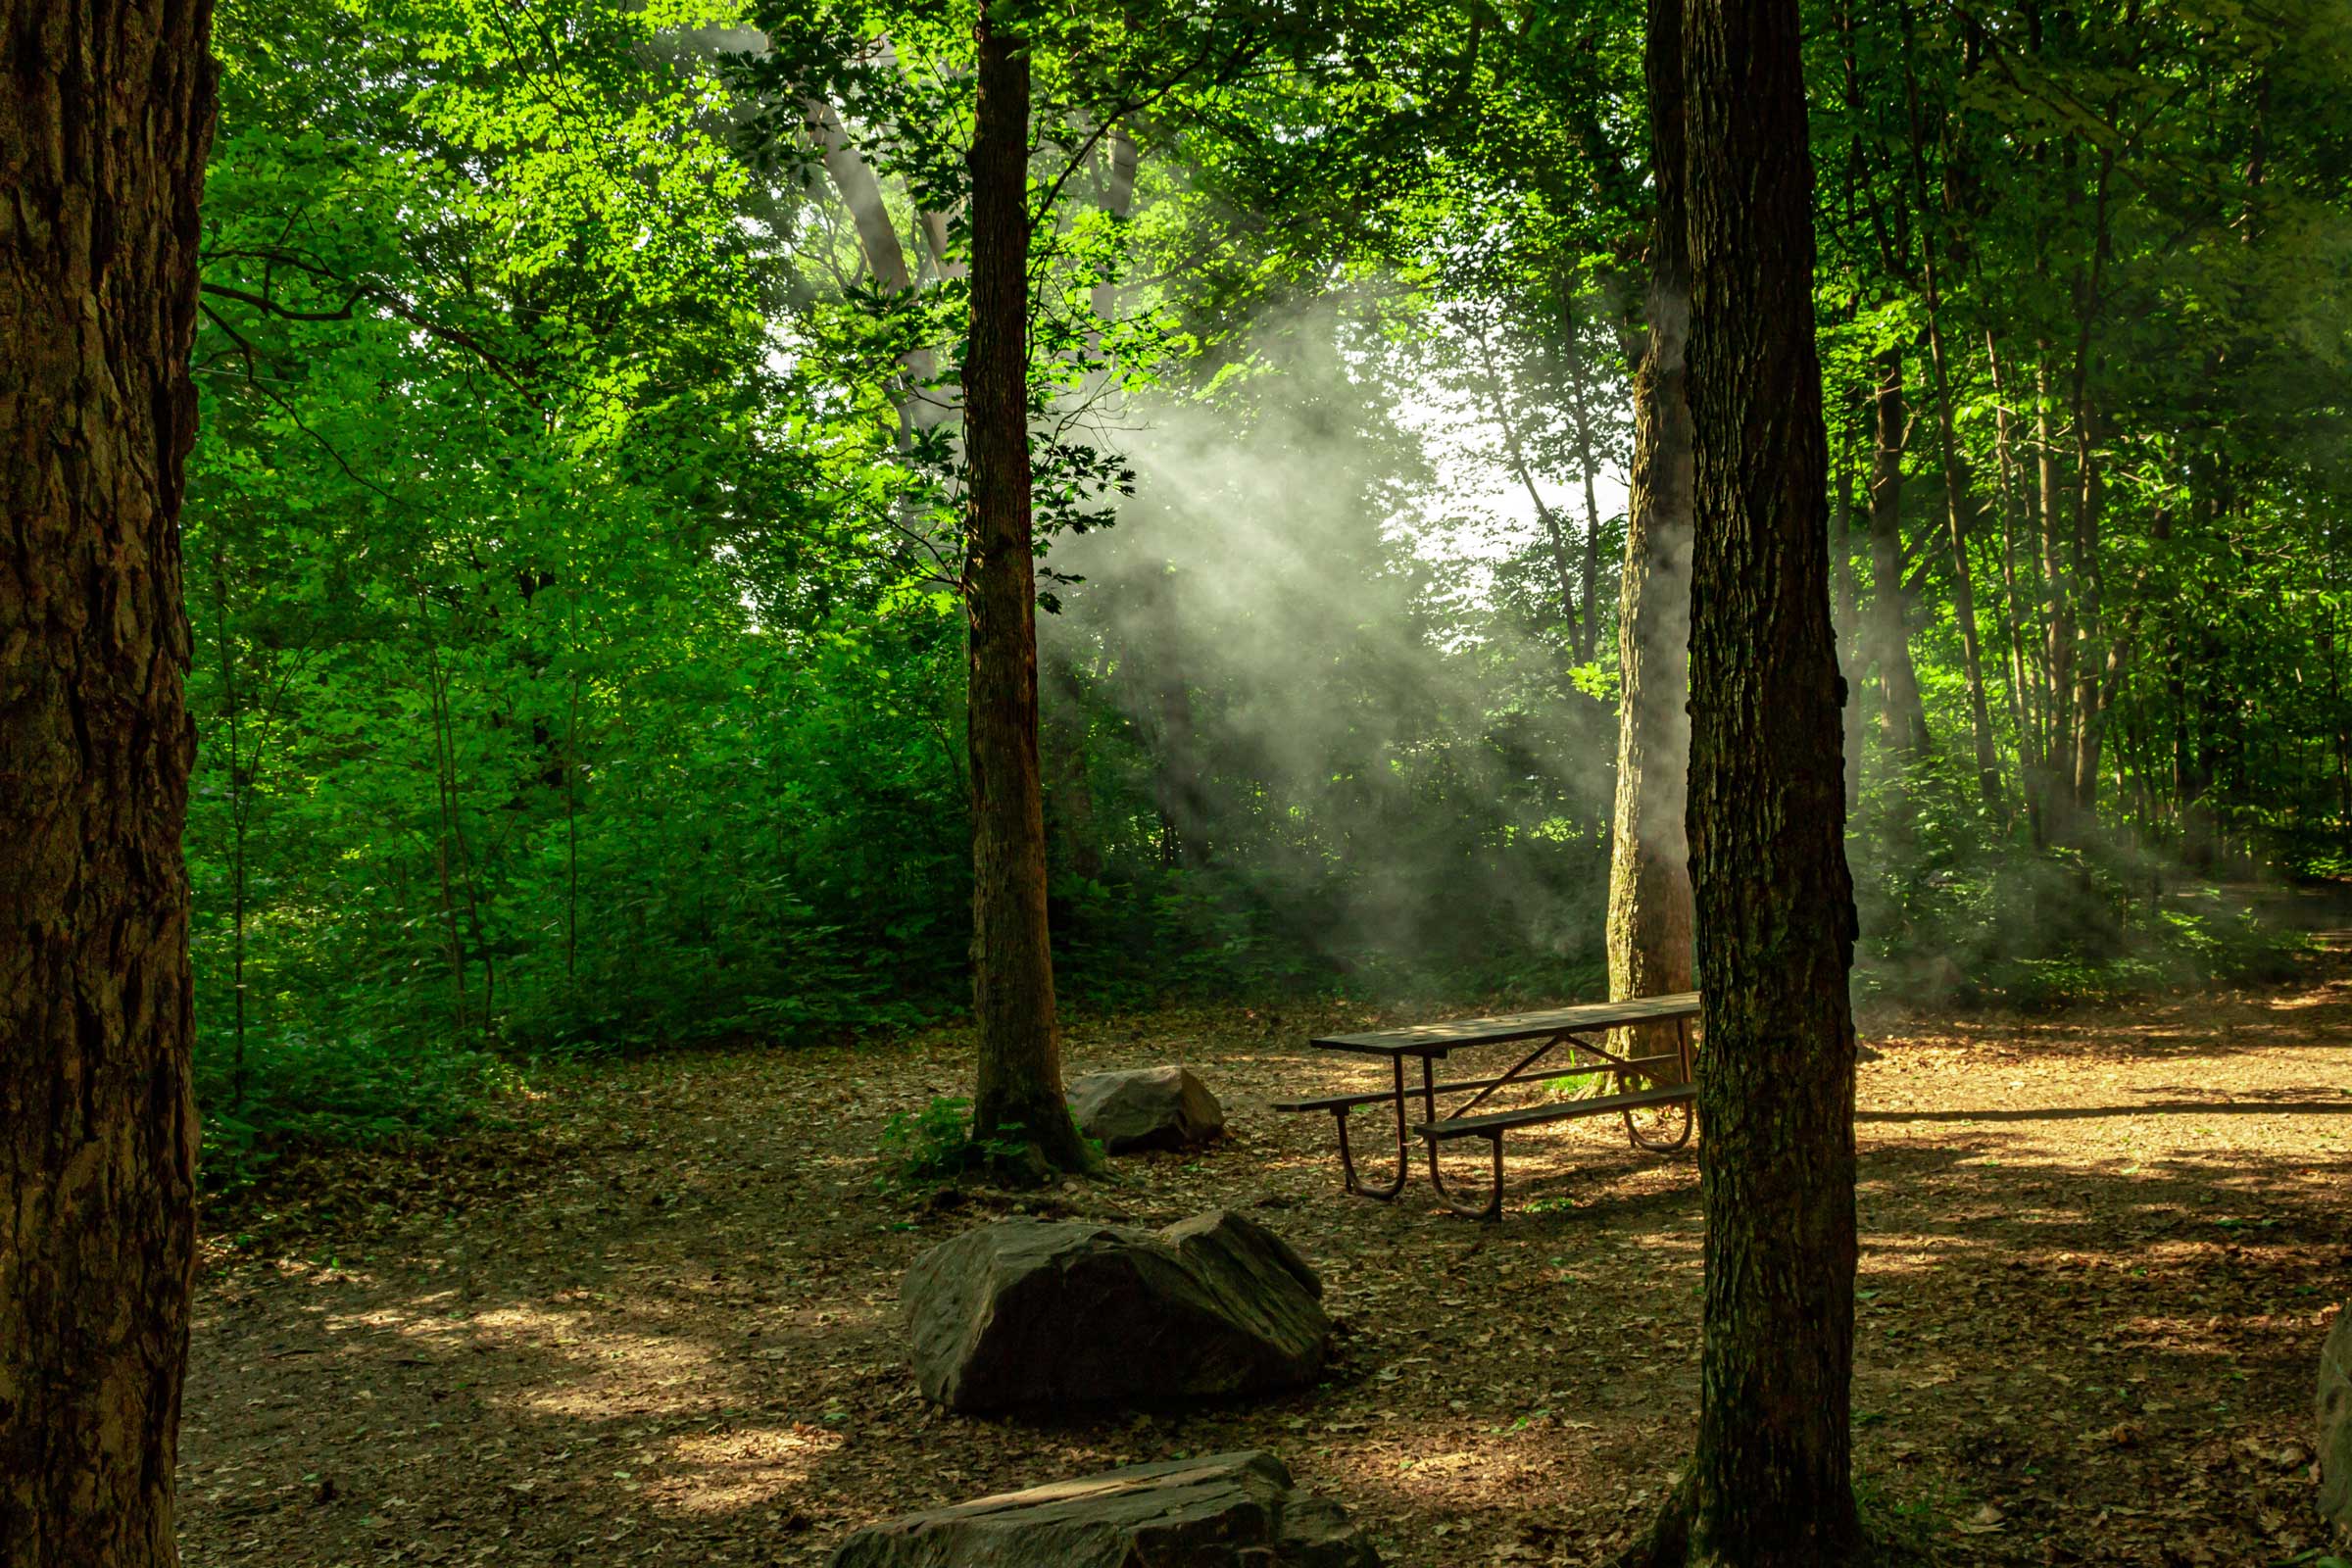 Camping spot in the woods with sunlit trees and picnic table